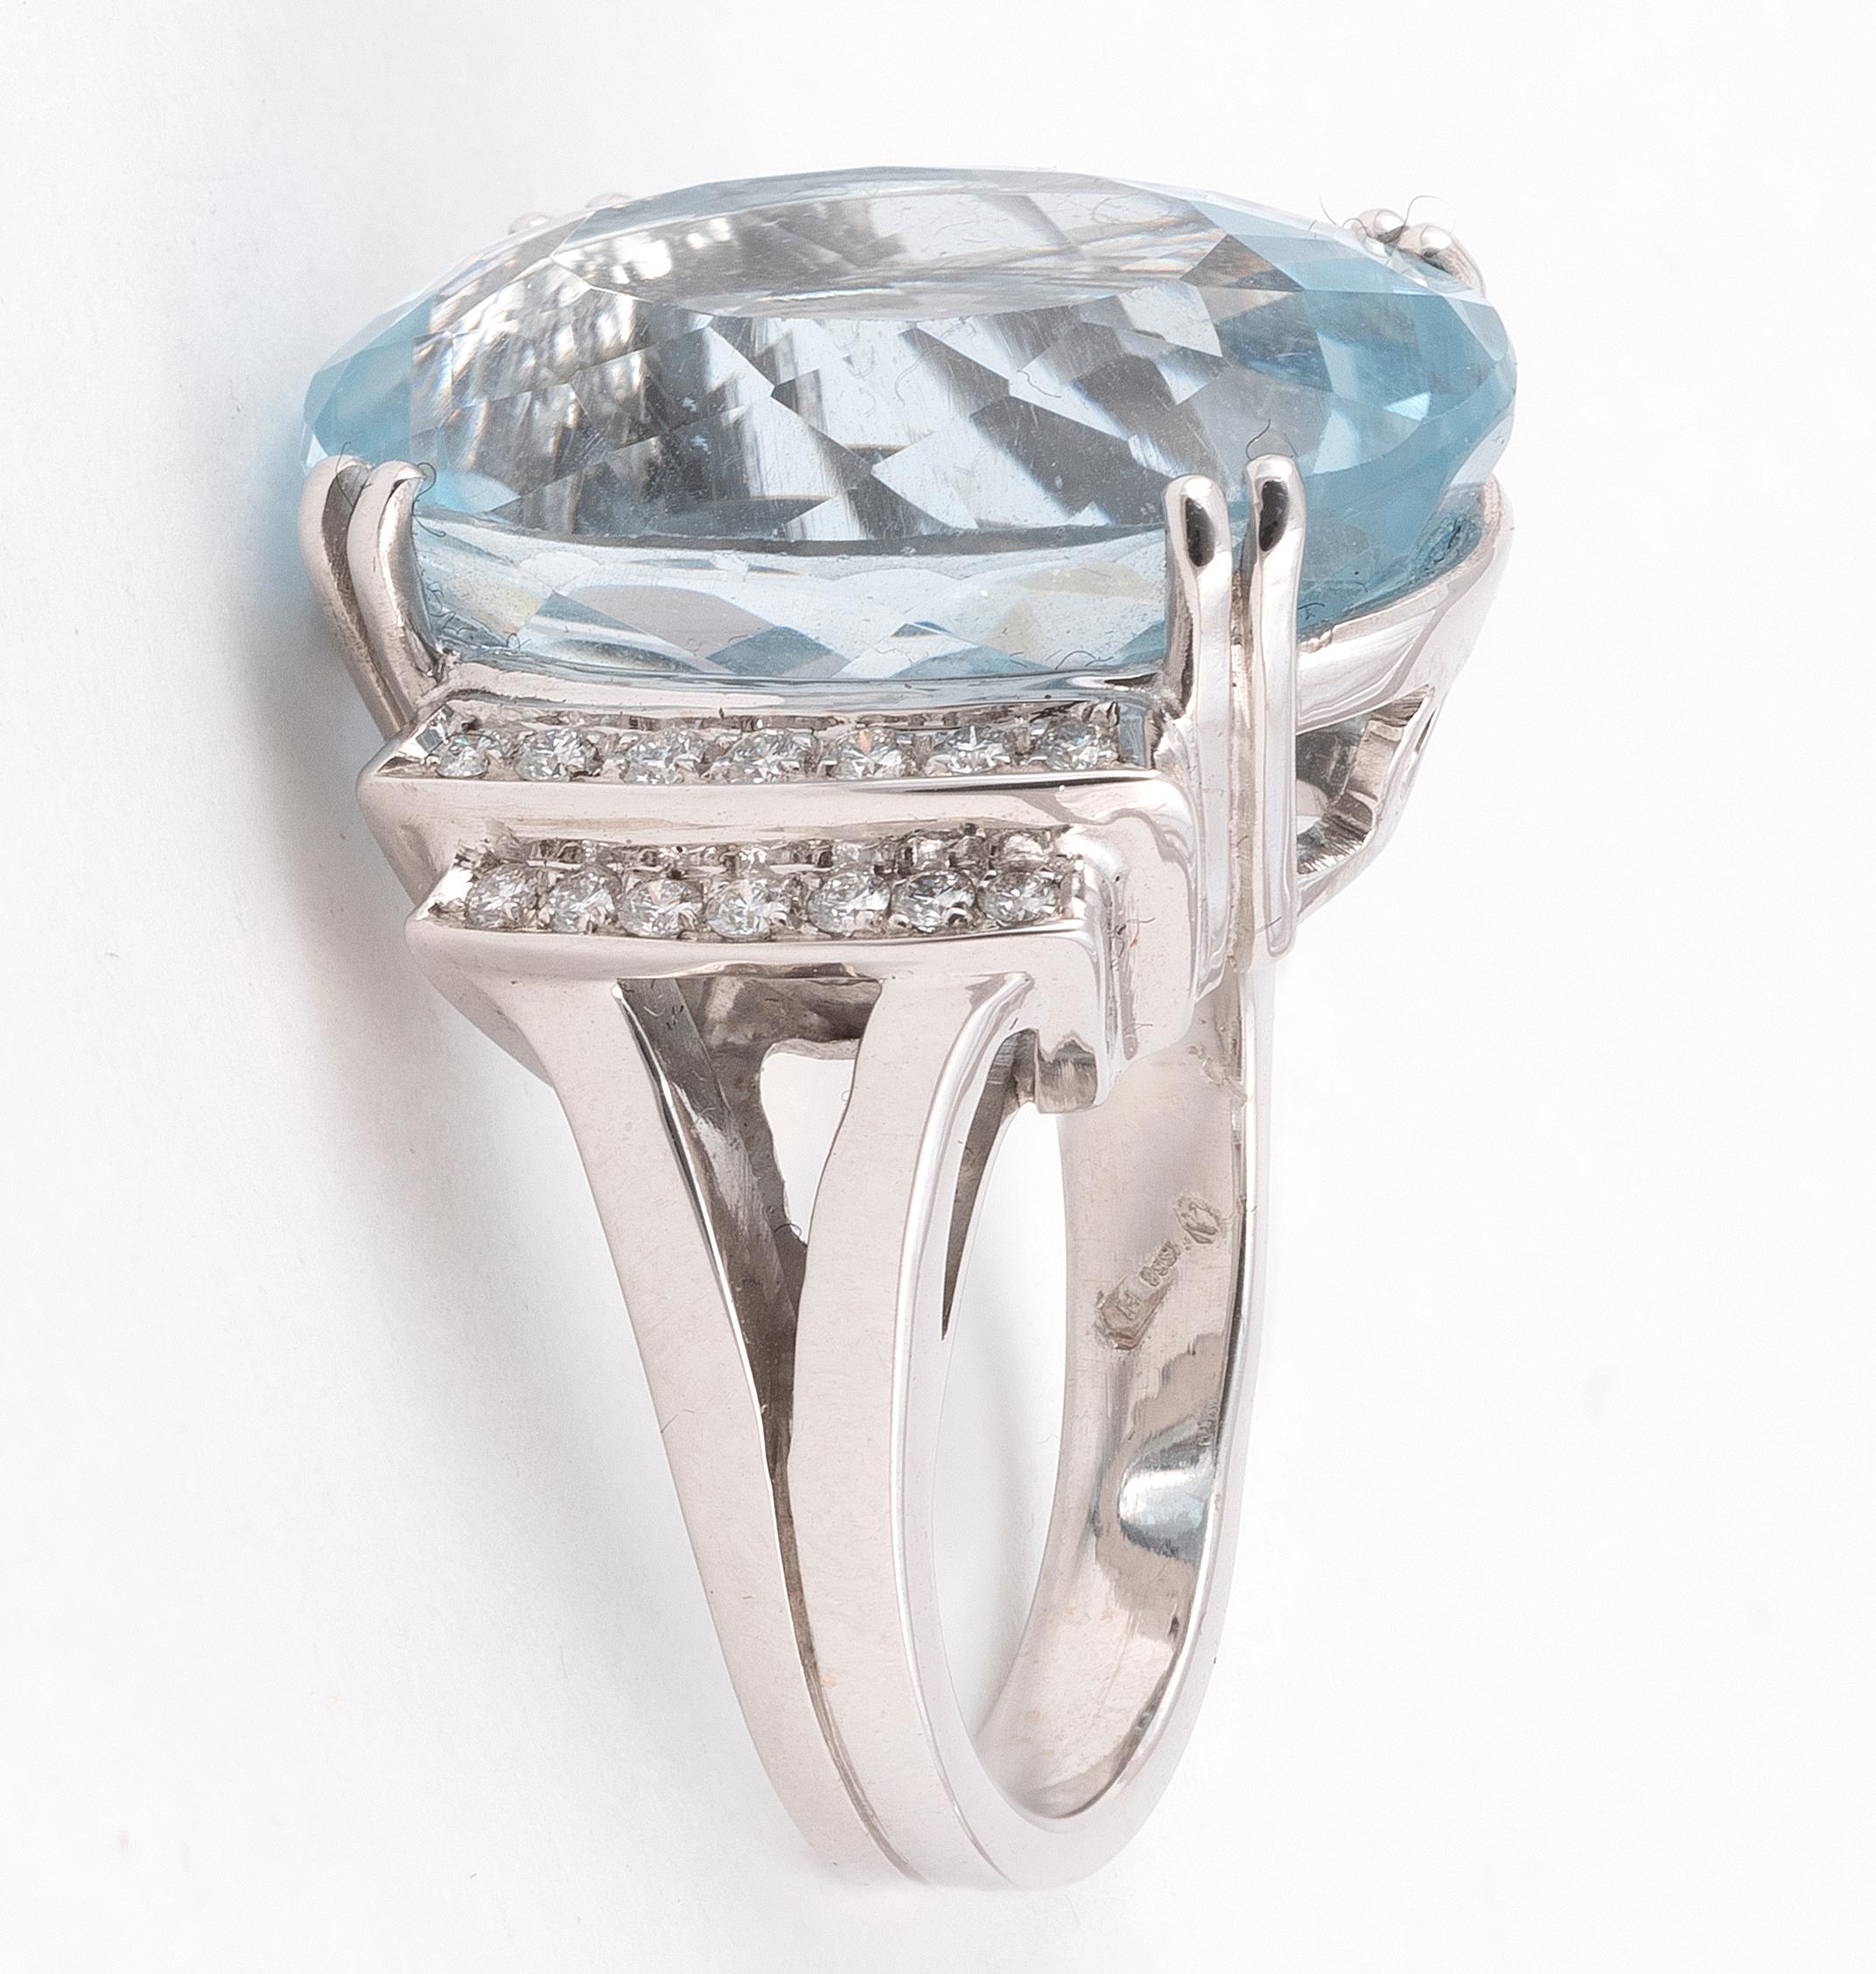 set in the center with an oval-shaped aquamarine weighing approximately 25cts, and accented by round diamonds weighing approximately 1.45cts, mounted in 18k white gold, size 8